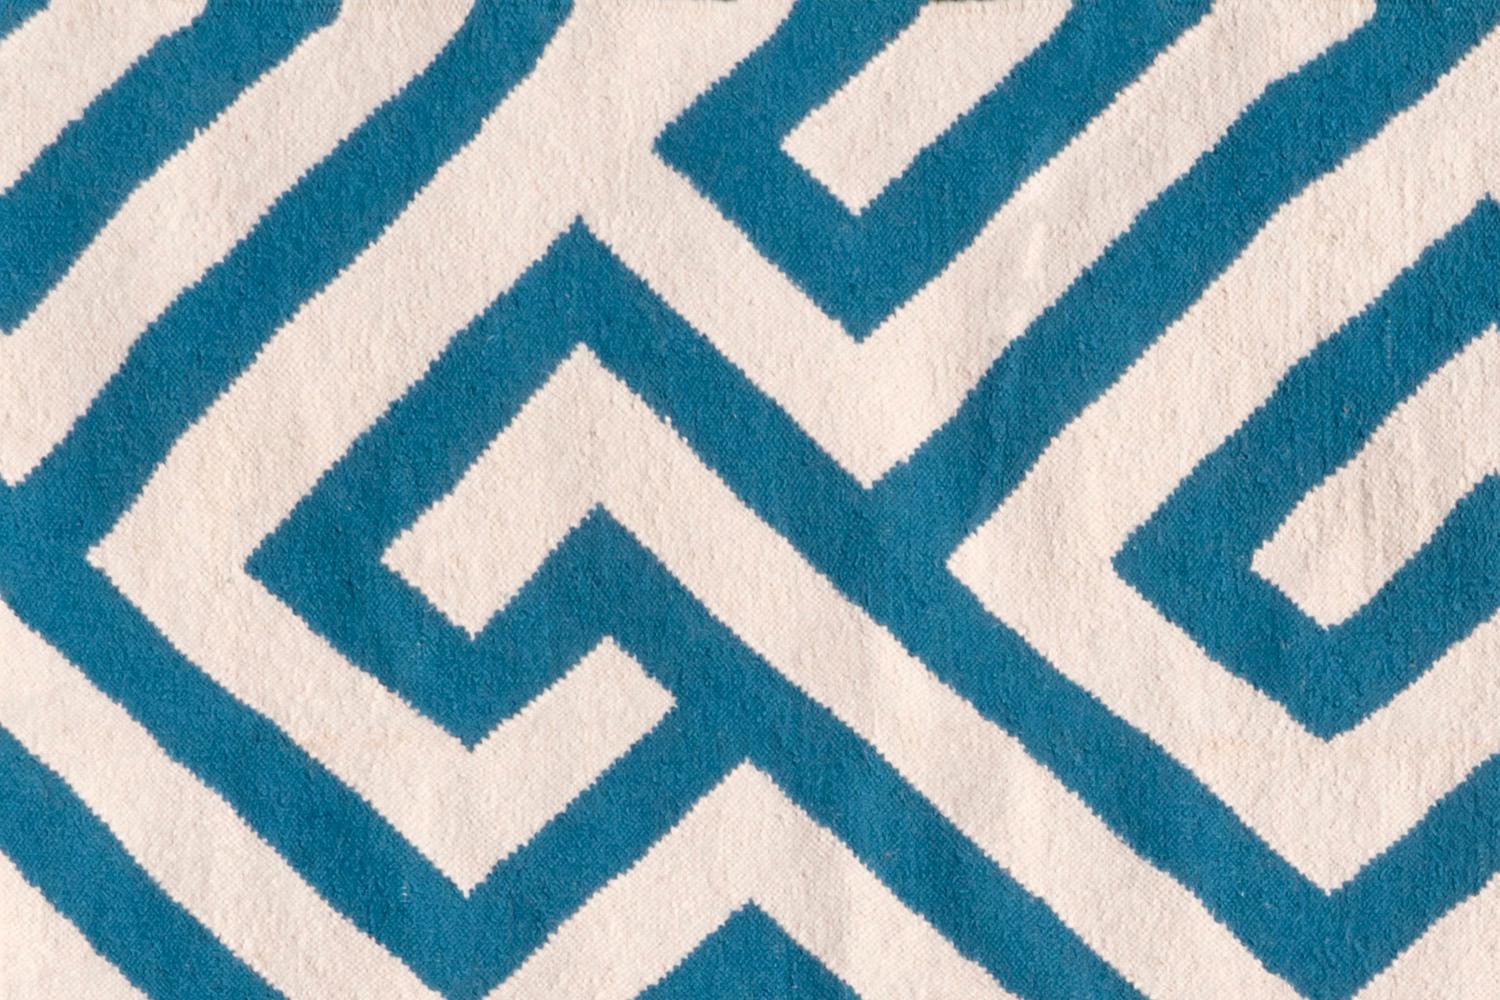 This rug has been ethically hand woven in the finest wool yarns by artisans in north of India, using a traditional weaving technique which is native of this region.
Each rug is handwoven with irregular details to create beautiful imperfections that